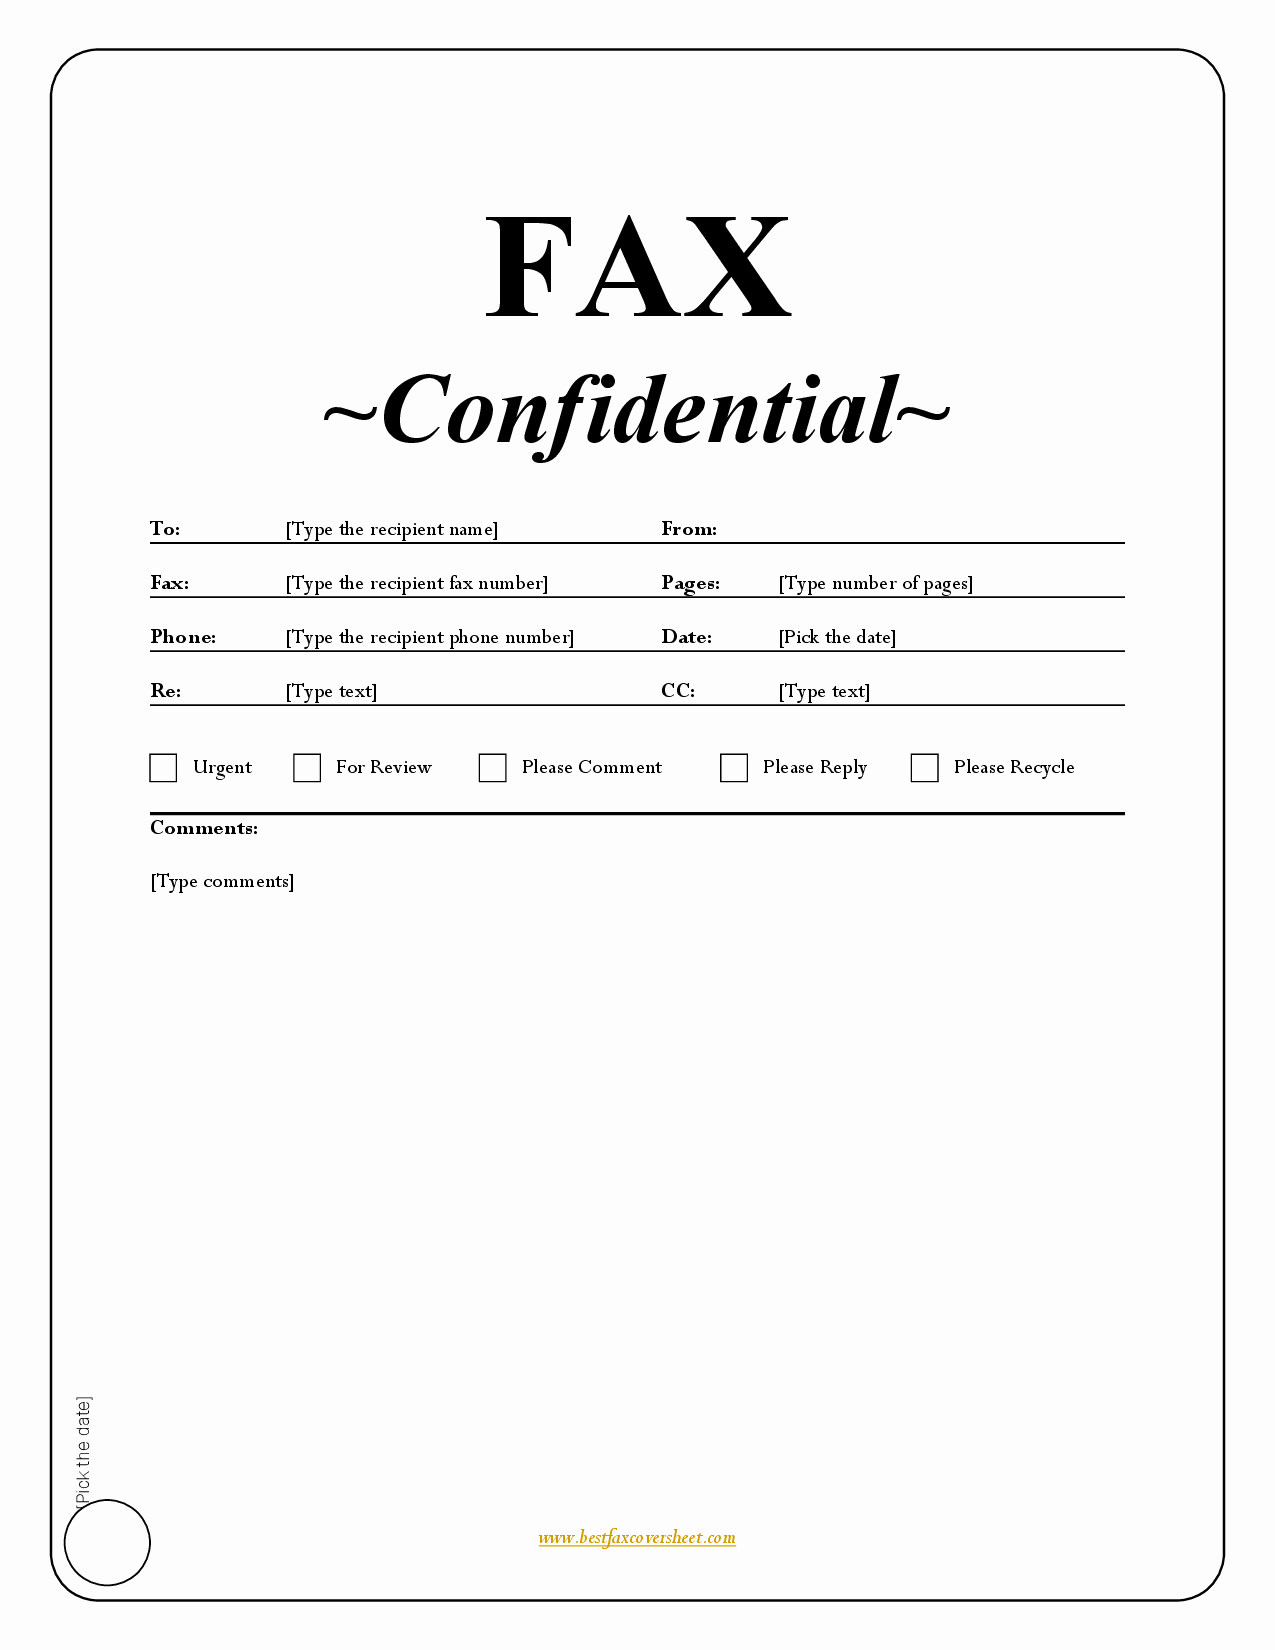 Medical Fax Cover Sheet Template New Fax Sample Cover Sheet Template Printable Page